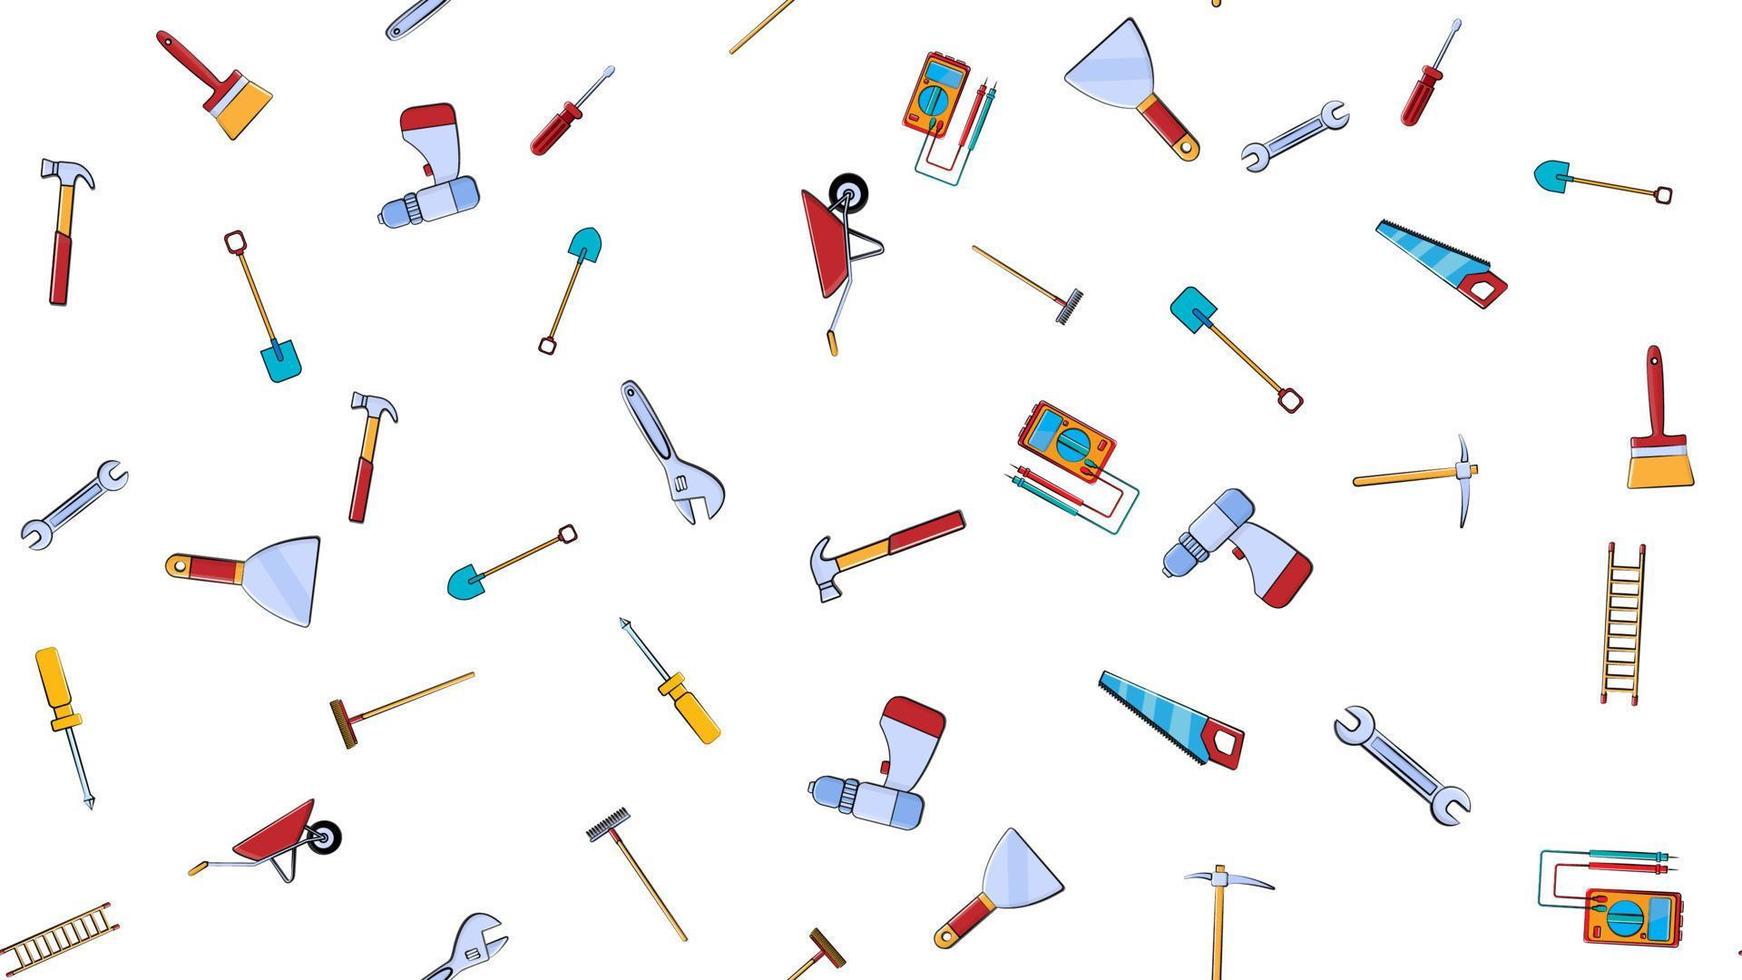 Texture, seamless pattern from a set of construction tools for repair hammer, shovel, screwdriver, wrench, tester, brush, saw, trolley, trowel, ladder on a white background. Vector illustration